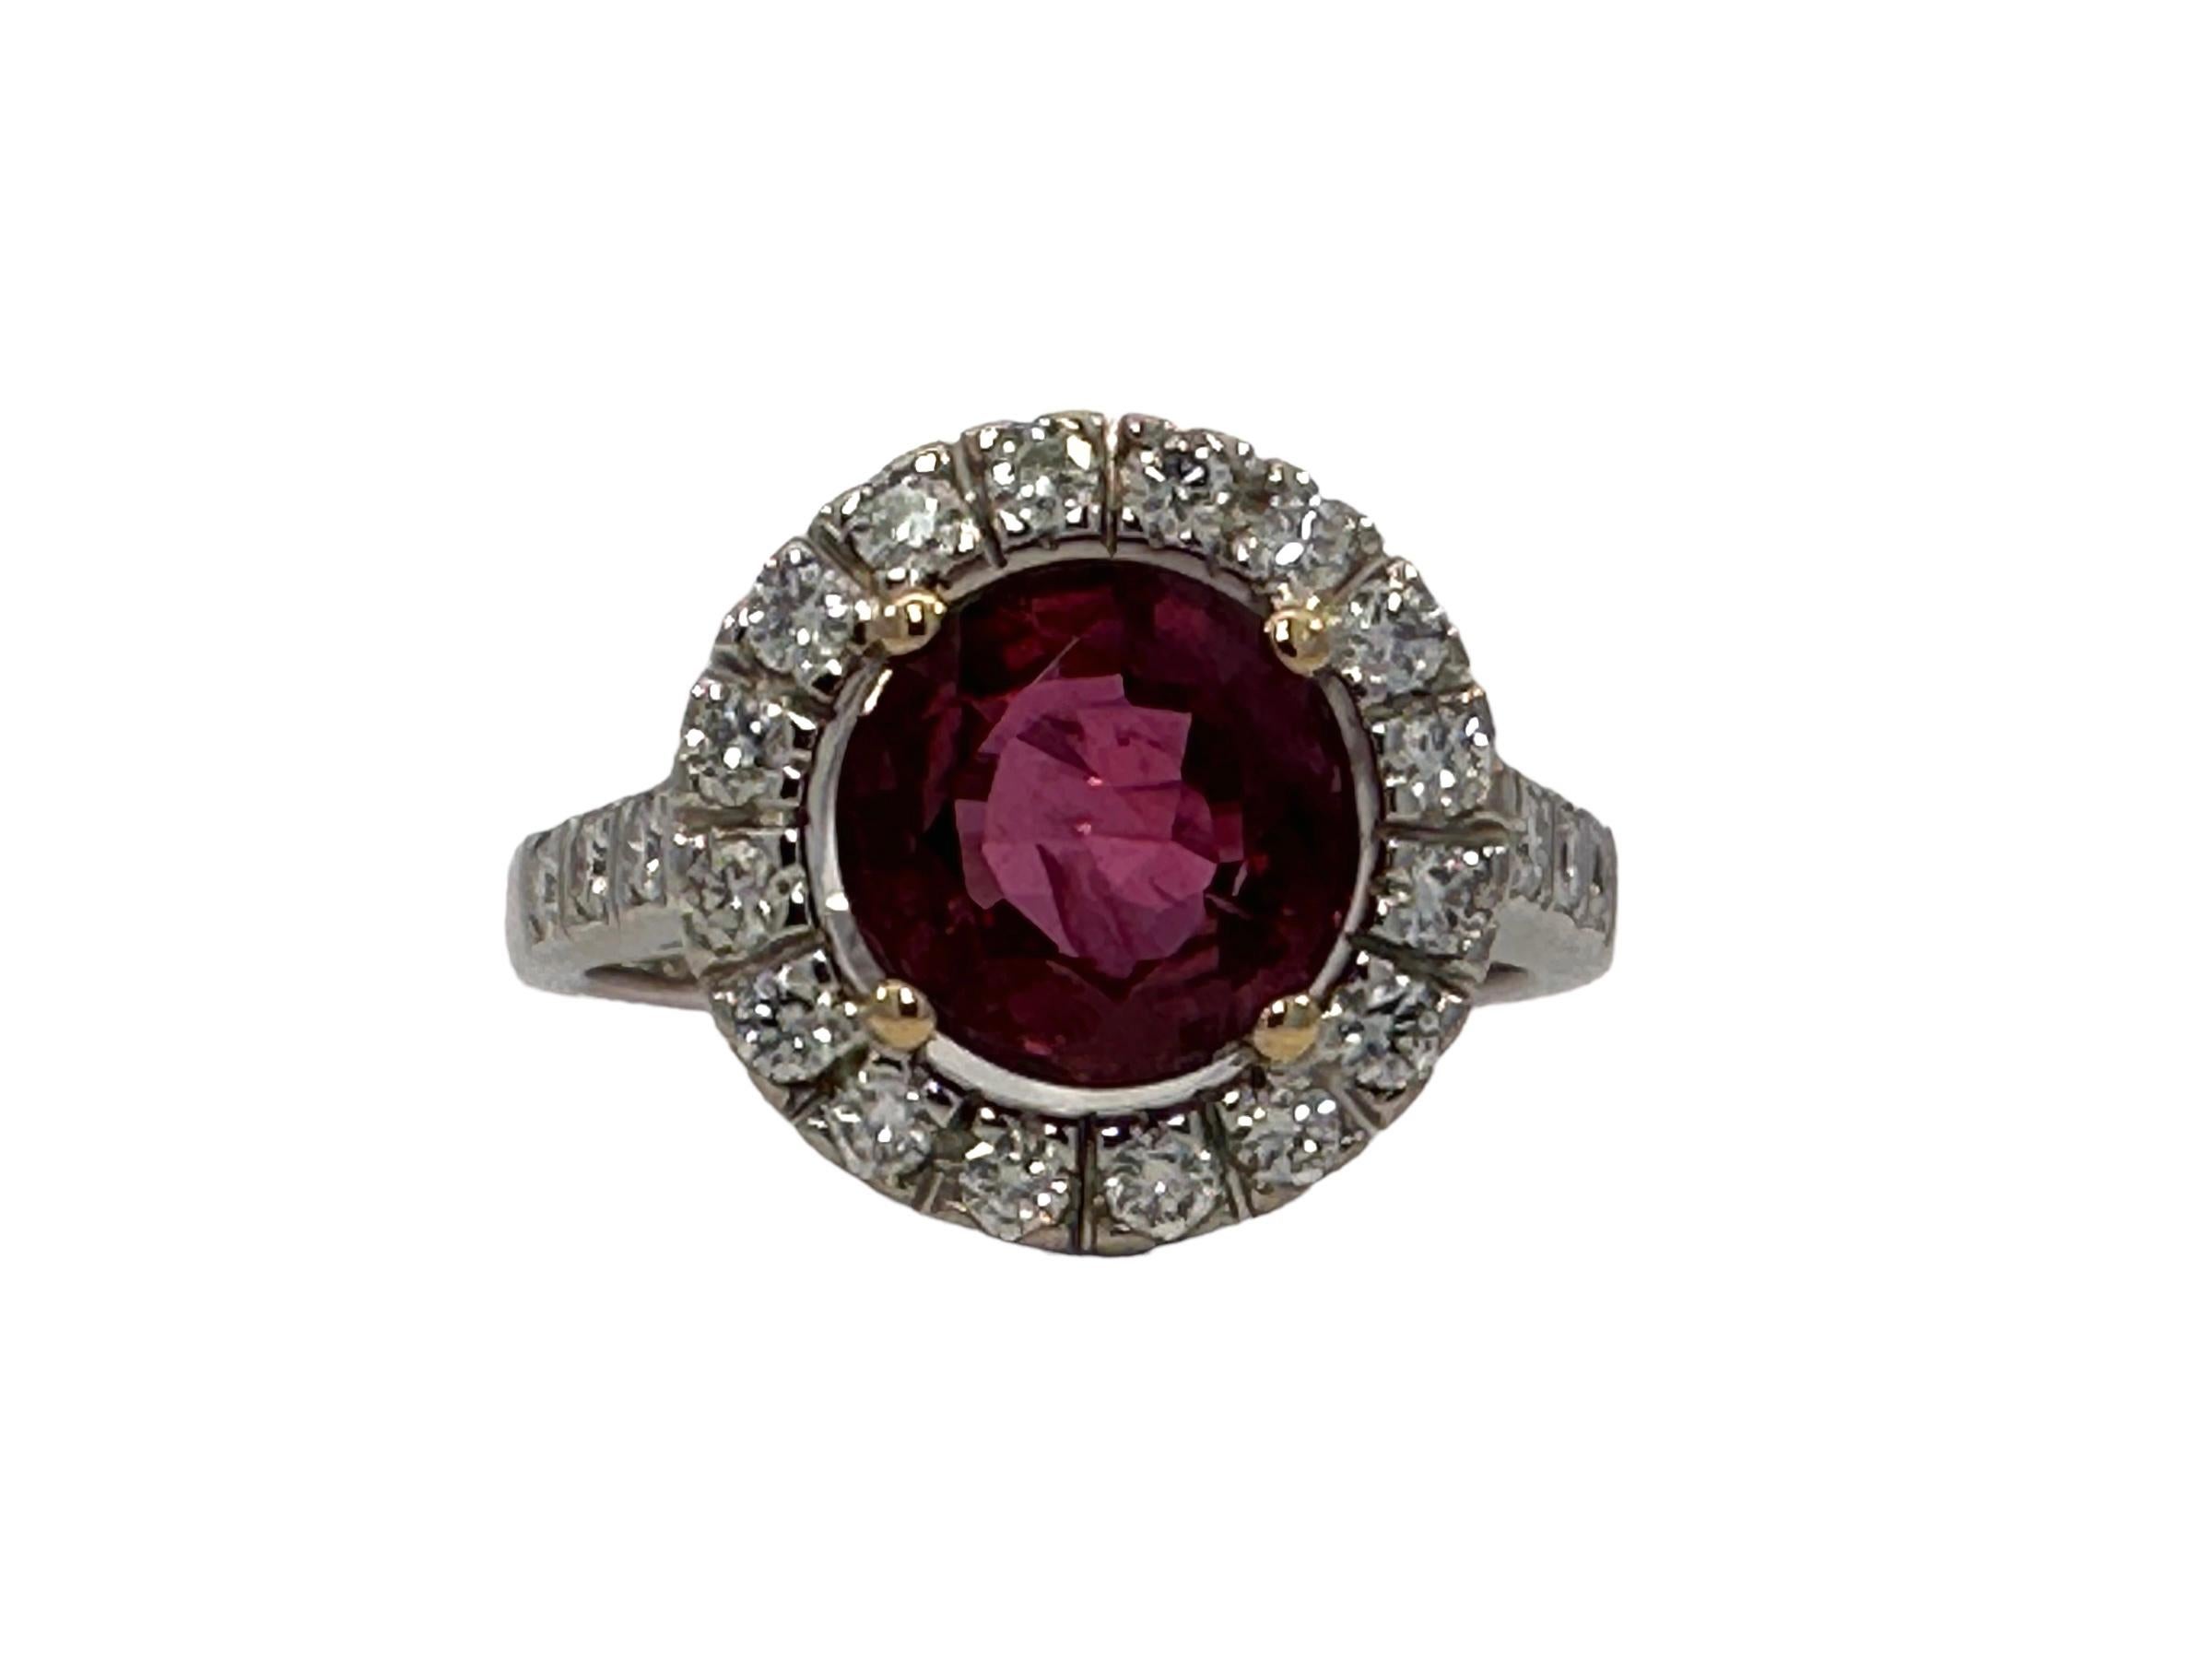 Fabulous 18kt White Gold 2.51 Ruby With Certificate and 0.44ct Diamonds

Ruby: Natural Corundum Ruby, Round cut, Intense Purplish Pinkish red, 2.51ct

Diamonds: 22 diamonds together 0.44ct

Material: 18kt white gold

Ring size: 51 EU / 5.75 US ( can